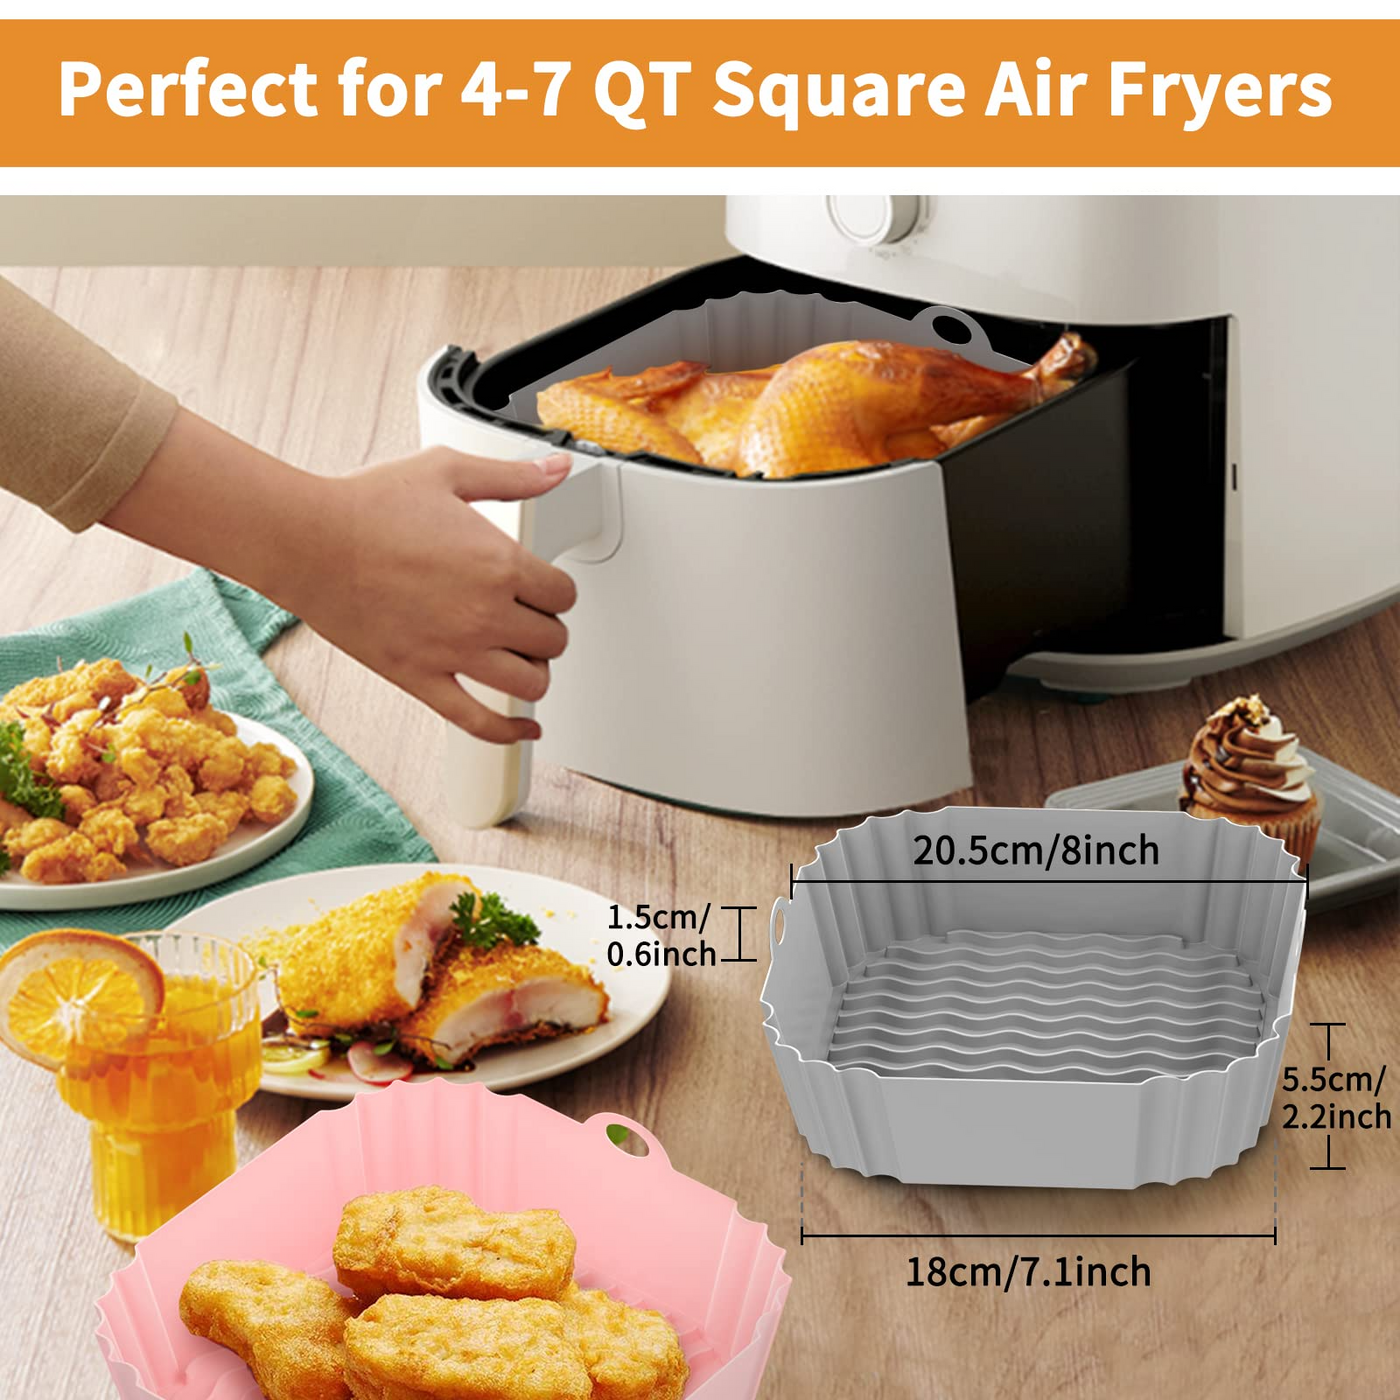 OUTXE Reusable Square Air Fryer Silicone Liner 8inch (4 to 7QT)